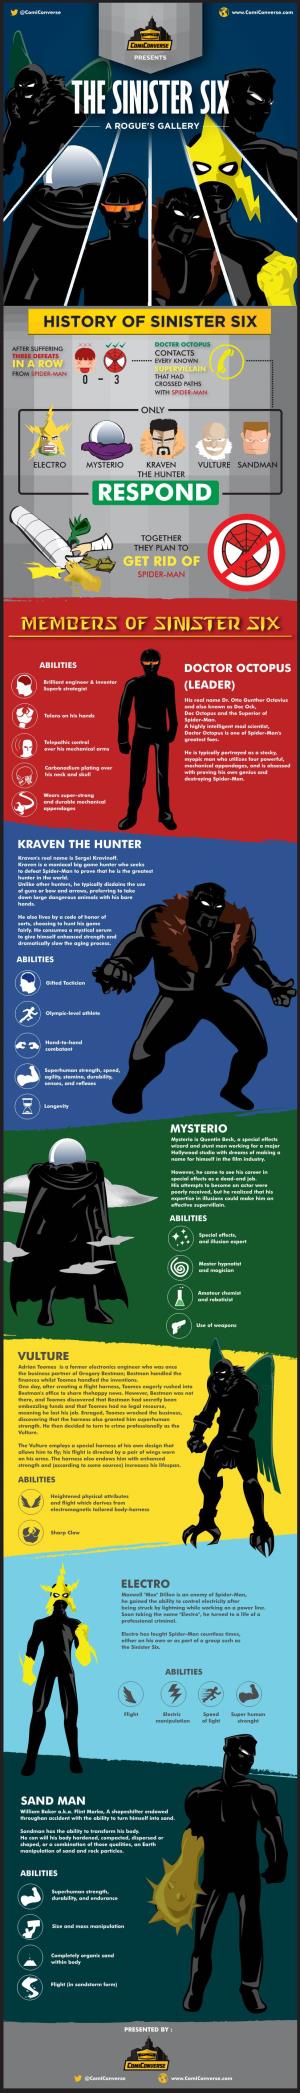 Sinister Six Infographic